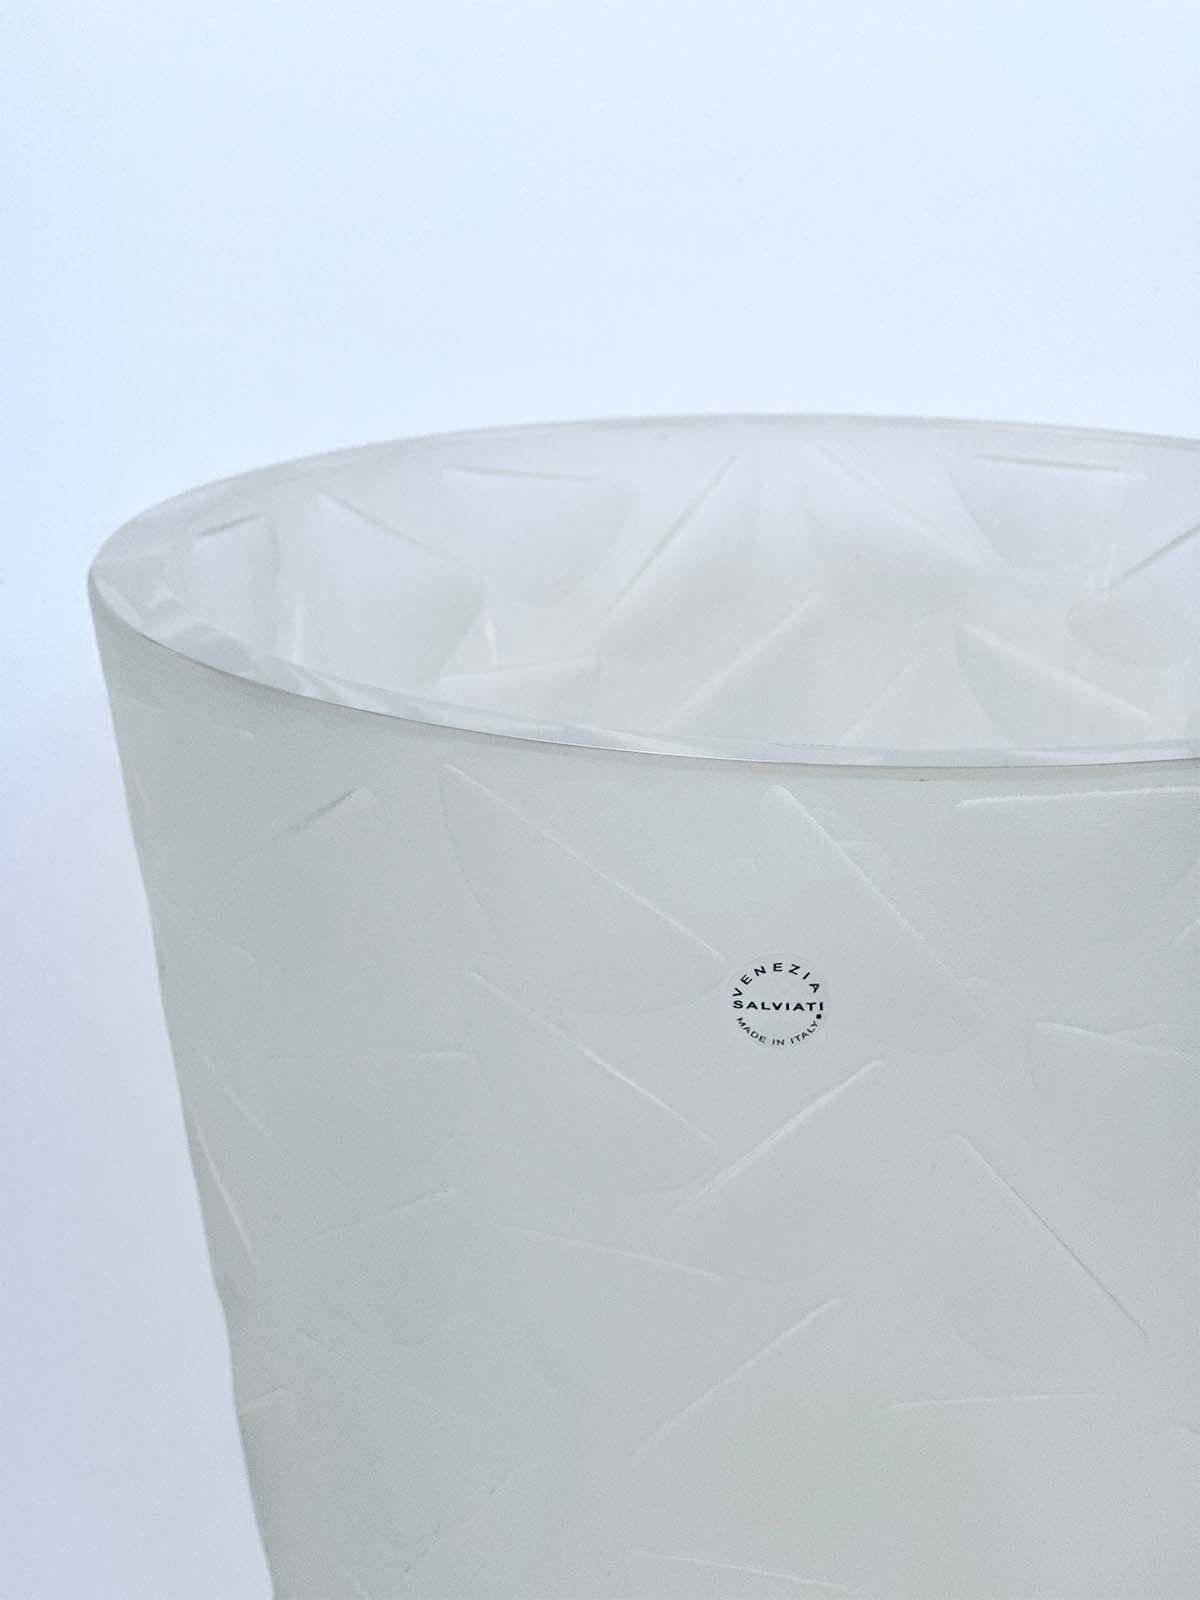 Vintage Italian Murano Glass Ice Bucket by Salviati, 2008 In Good Condition For Sale In Los Angeles, CA